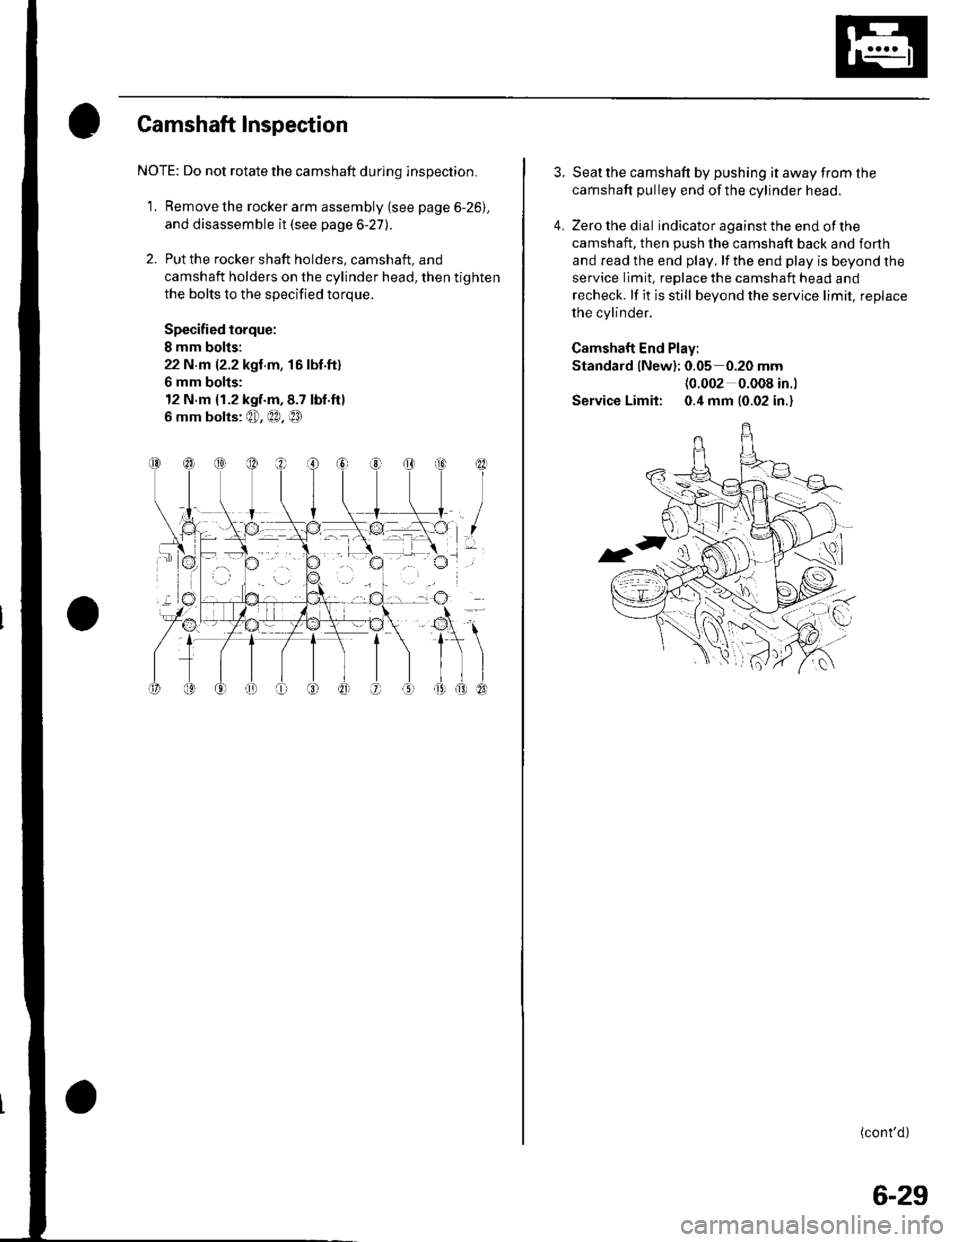 HONDA CIVIC 2003 7.G Workshop Manual Gamshaft Inspection
NOTE: Do not rotate the camshaft during inspection.
1. Remove the rocker arm assembly (see page 6-26).
and disassemble it (see page 6-27).
2. Put the rocker shaft holders, camshaft